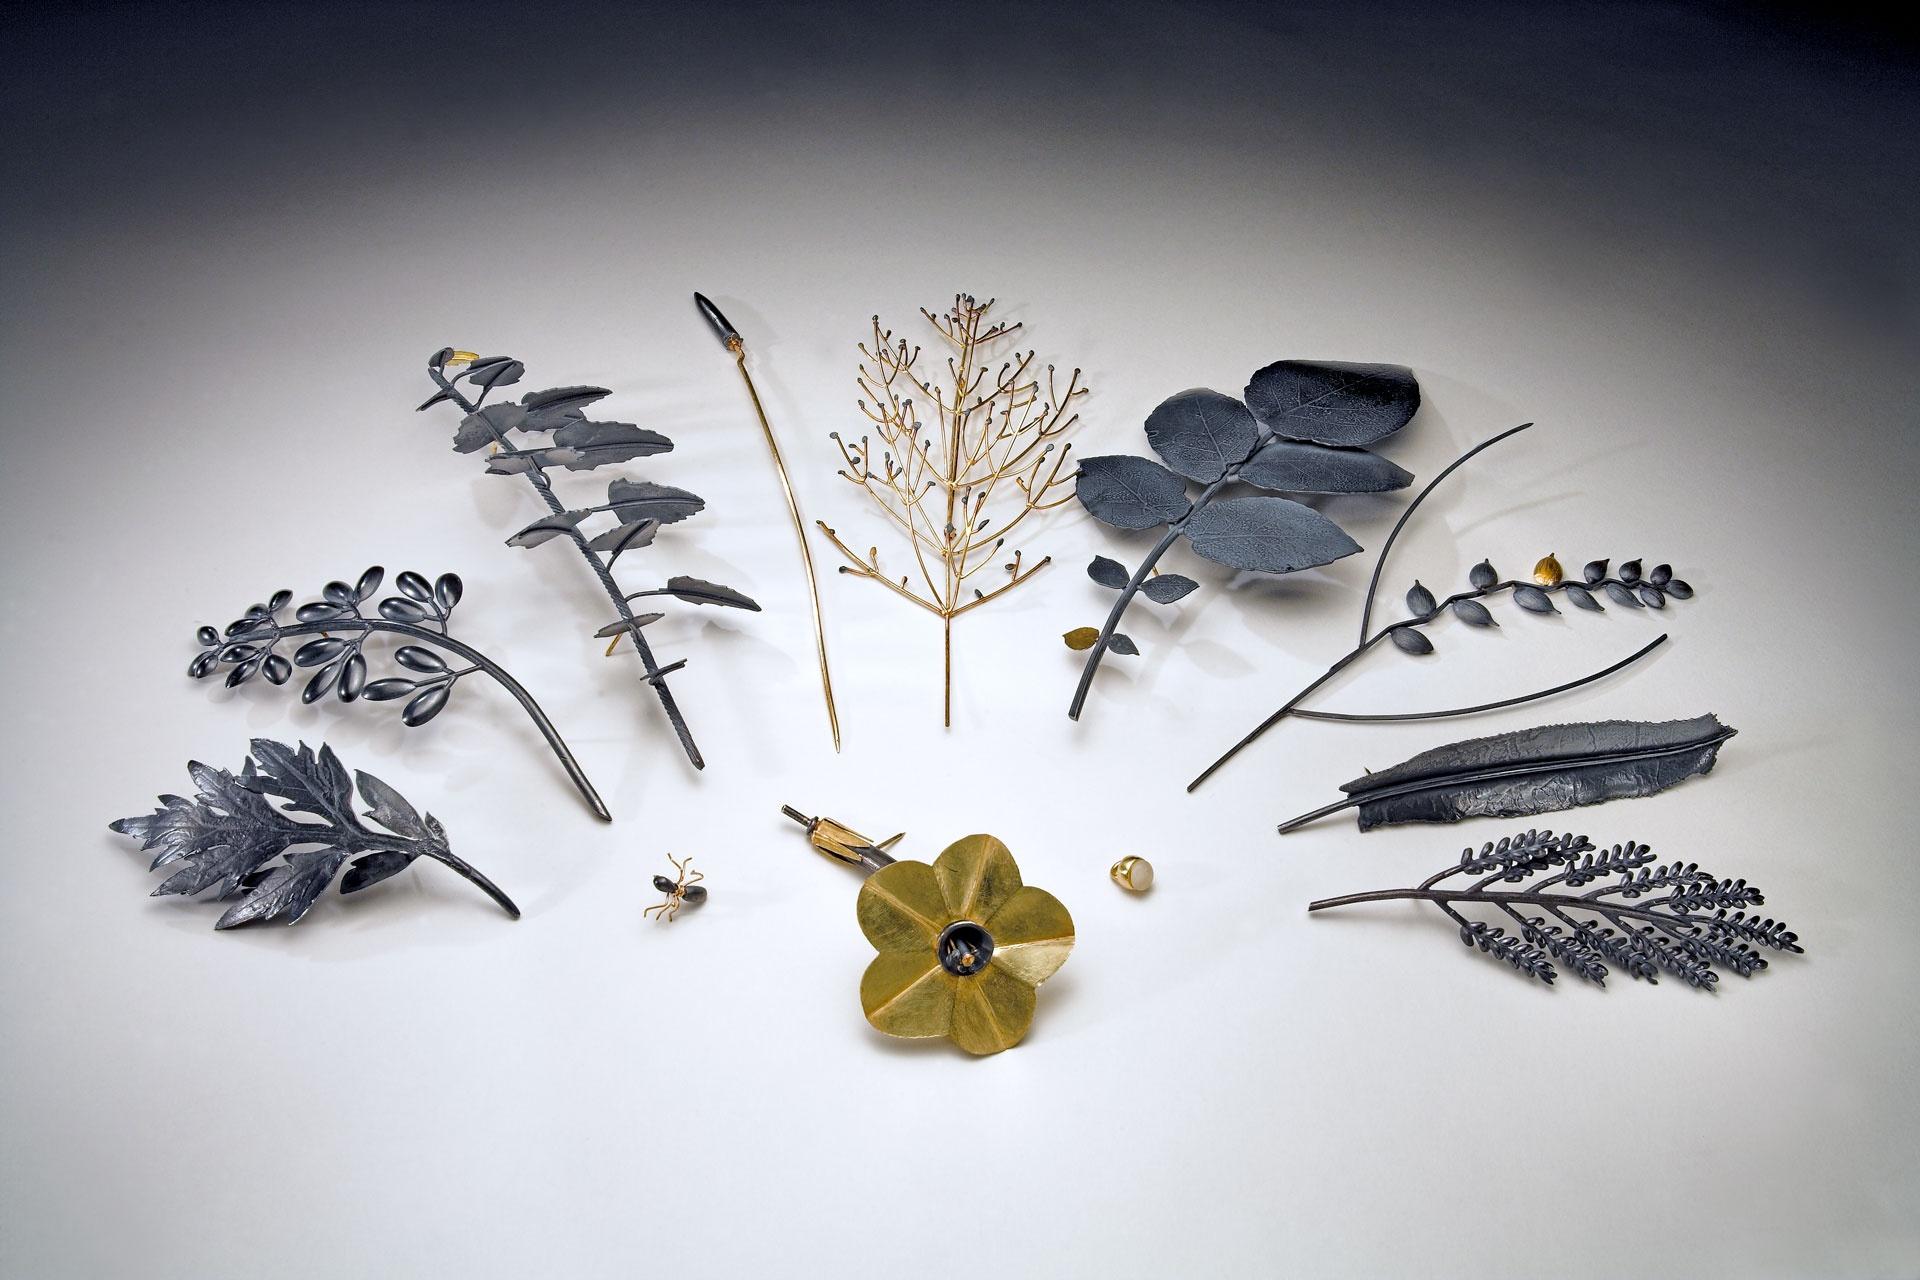 JAN YAGER'S THE TIARA OF USEFUL KNOWLEDGE, 2006, IS SHOWN HERE IN ITS PARTS: EIGHT BROOCHES, TWO STICK PINS, A TIE TACK AND A PENDANT